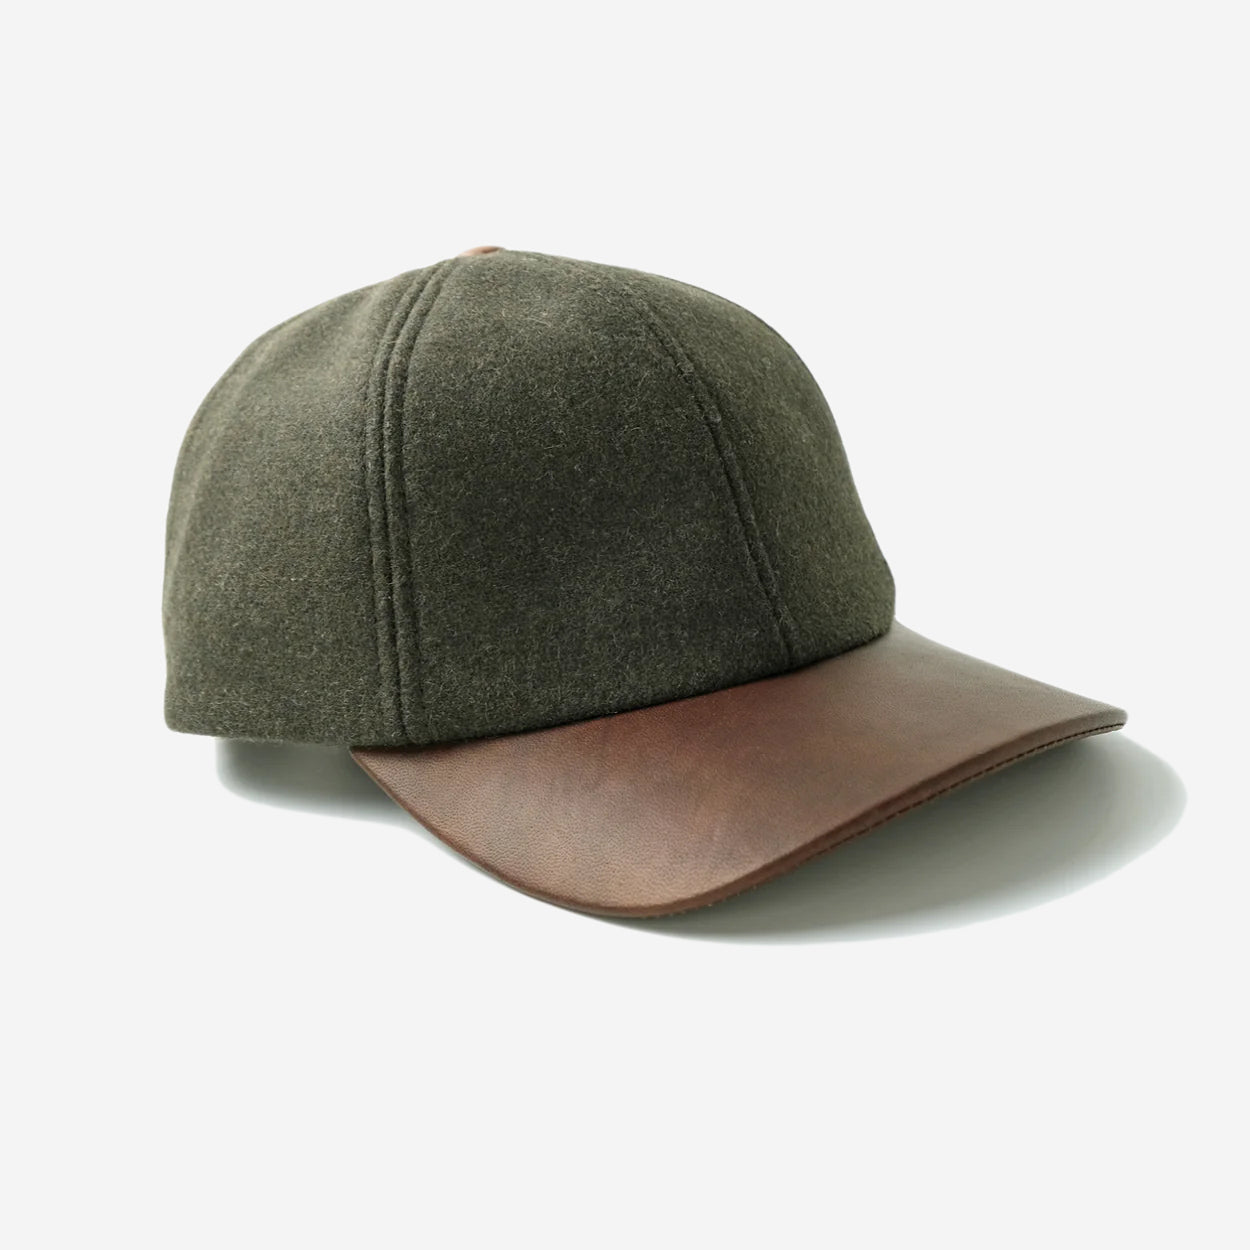 Wool Leather Ball Cap - Olive/Brown